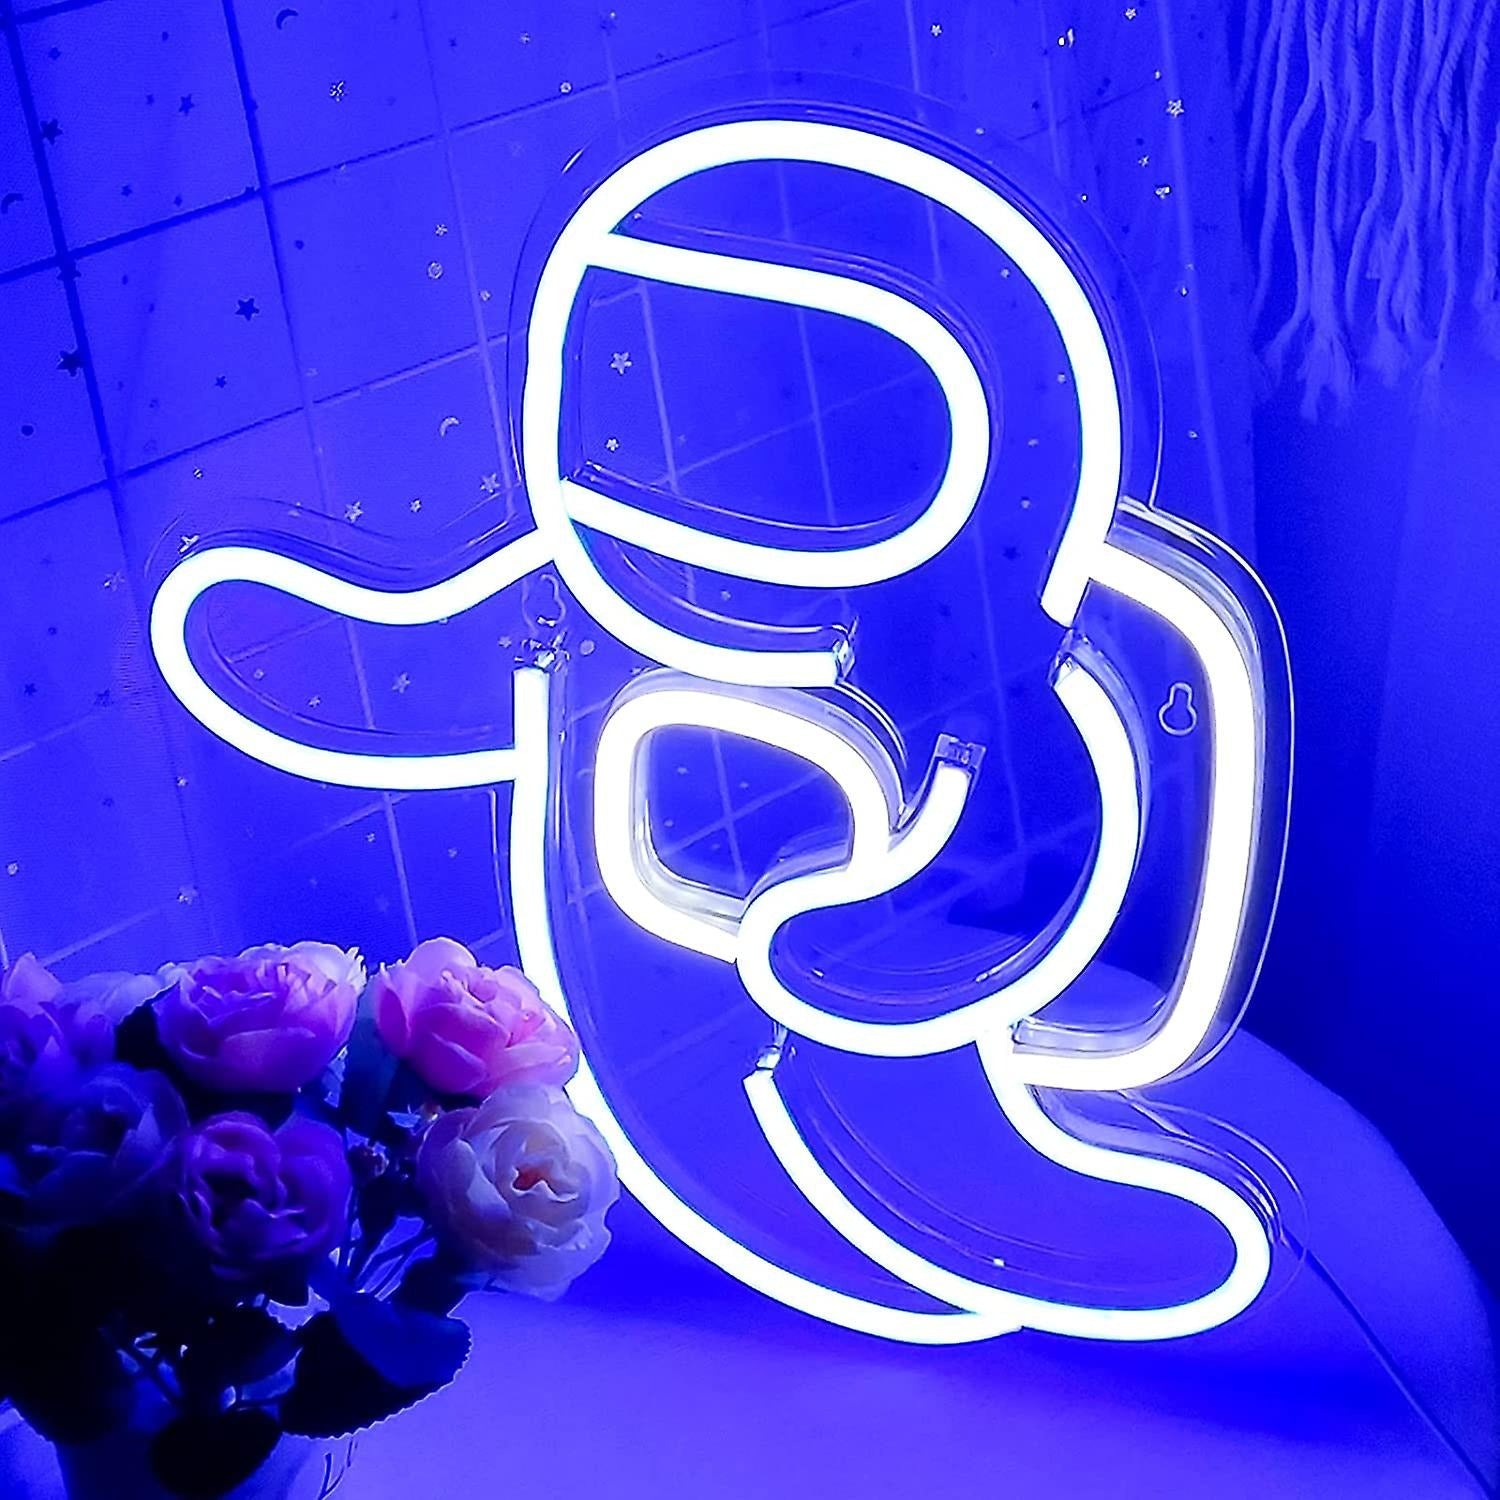 A LED game feature neon sign bring joy and entertainment